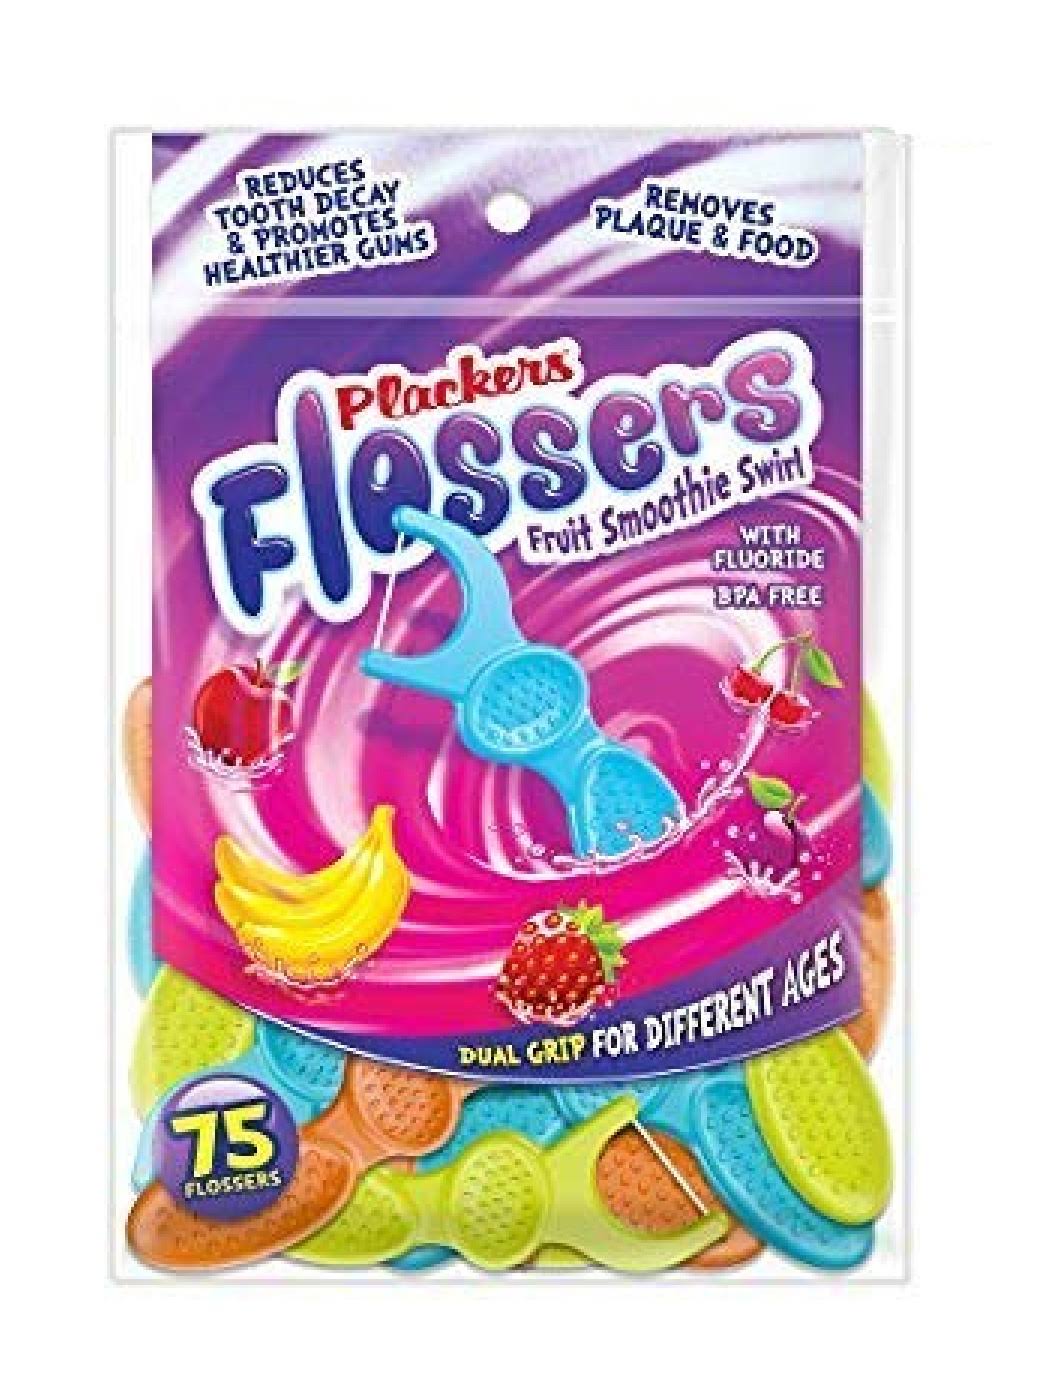 Plackers Kids Flossers - with Fluoride Fruit Smoothie Swirl Flavor, 150ct